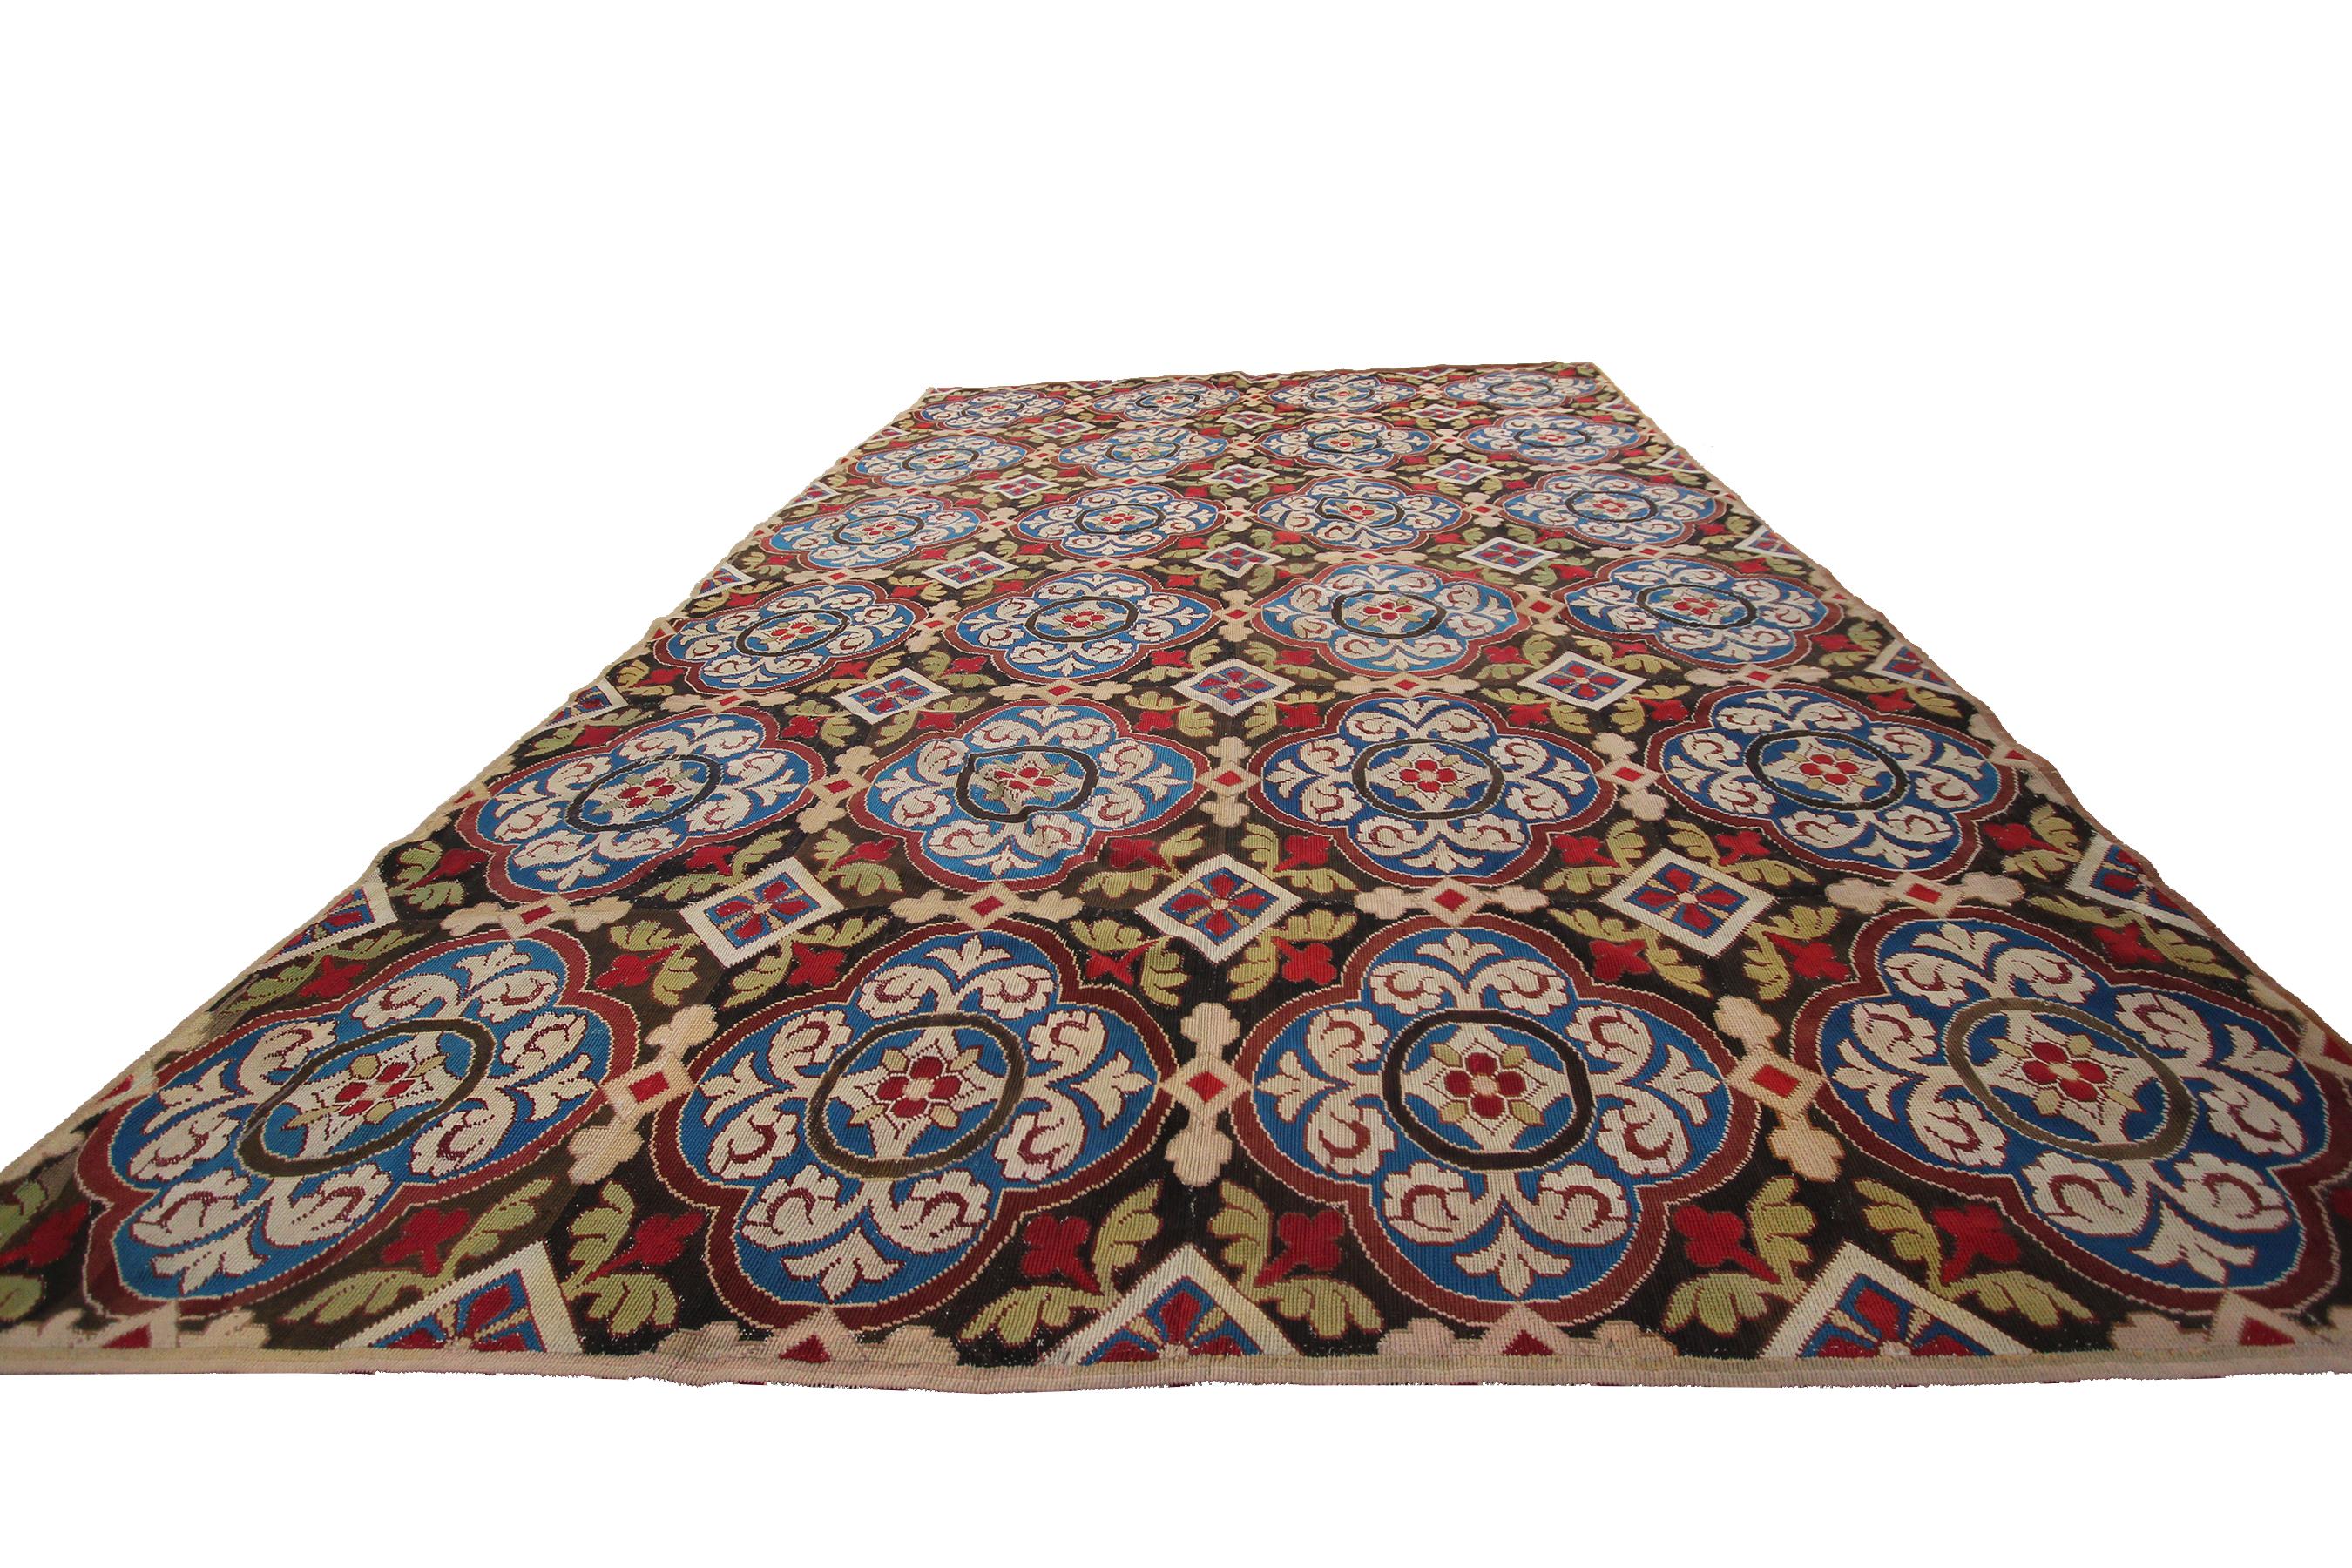 Late 19th Century 1890 Antique English Needlepoint Overall Geometric Rug Tapestry For Sale